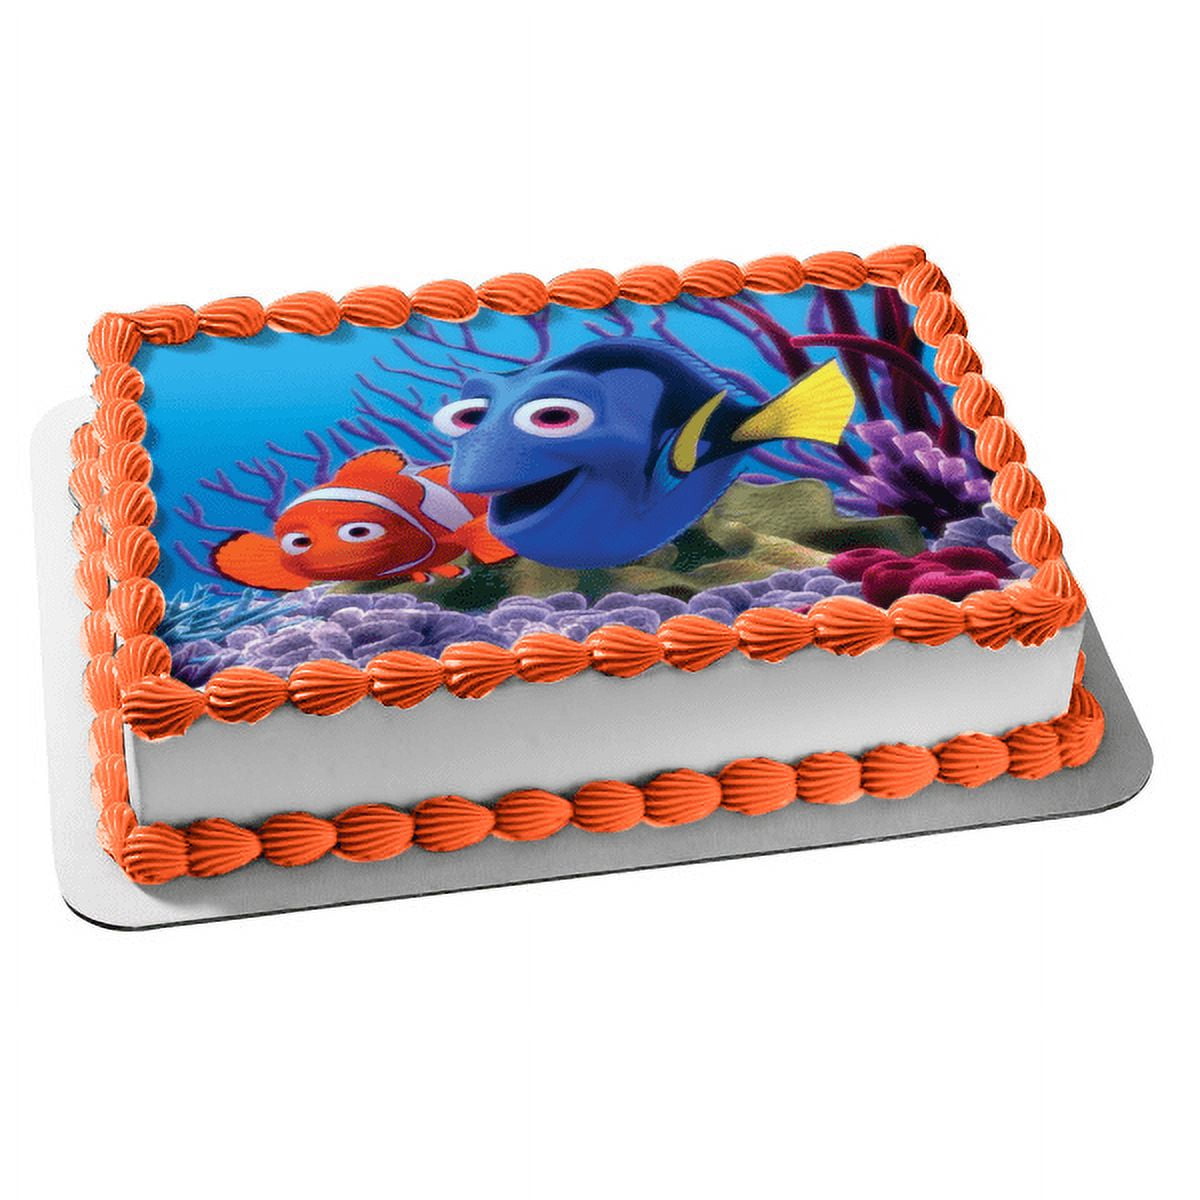 Finding Nemo Cake Toppers